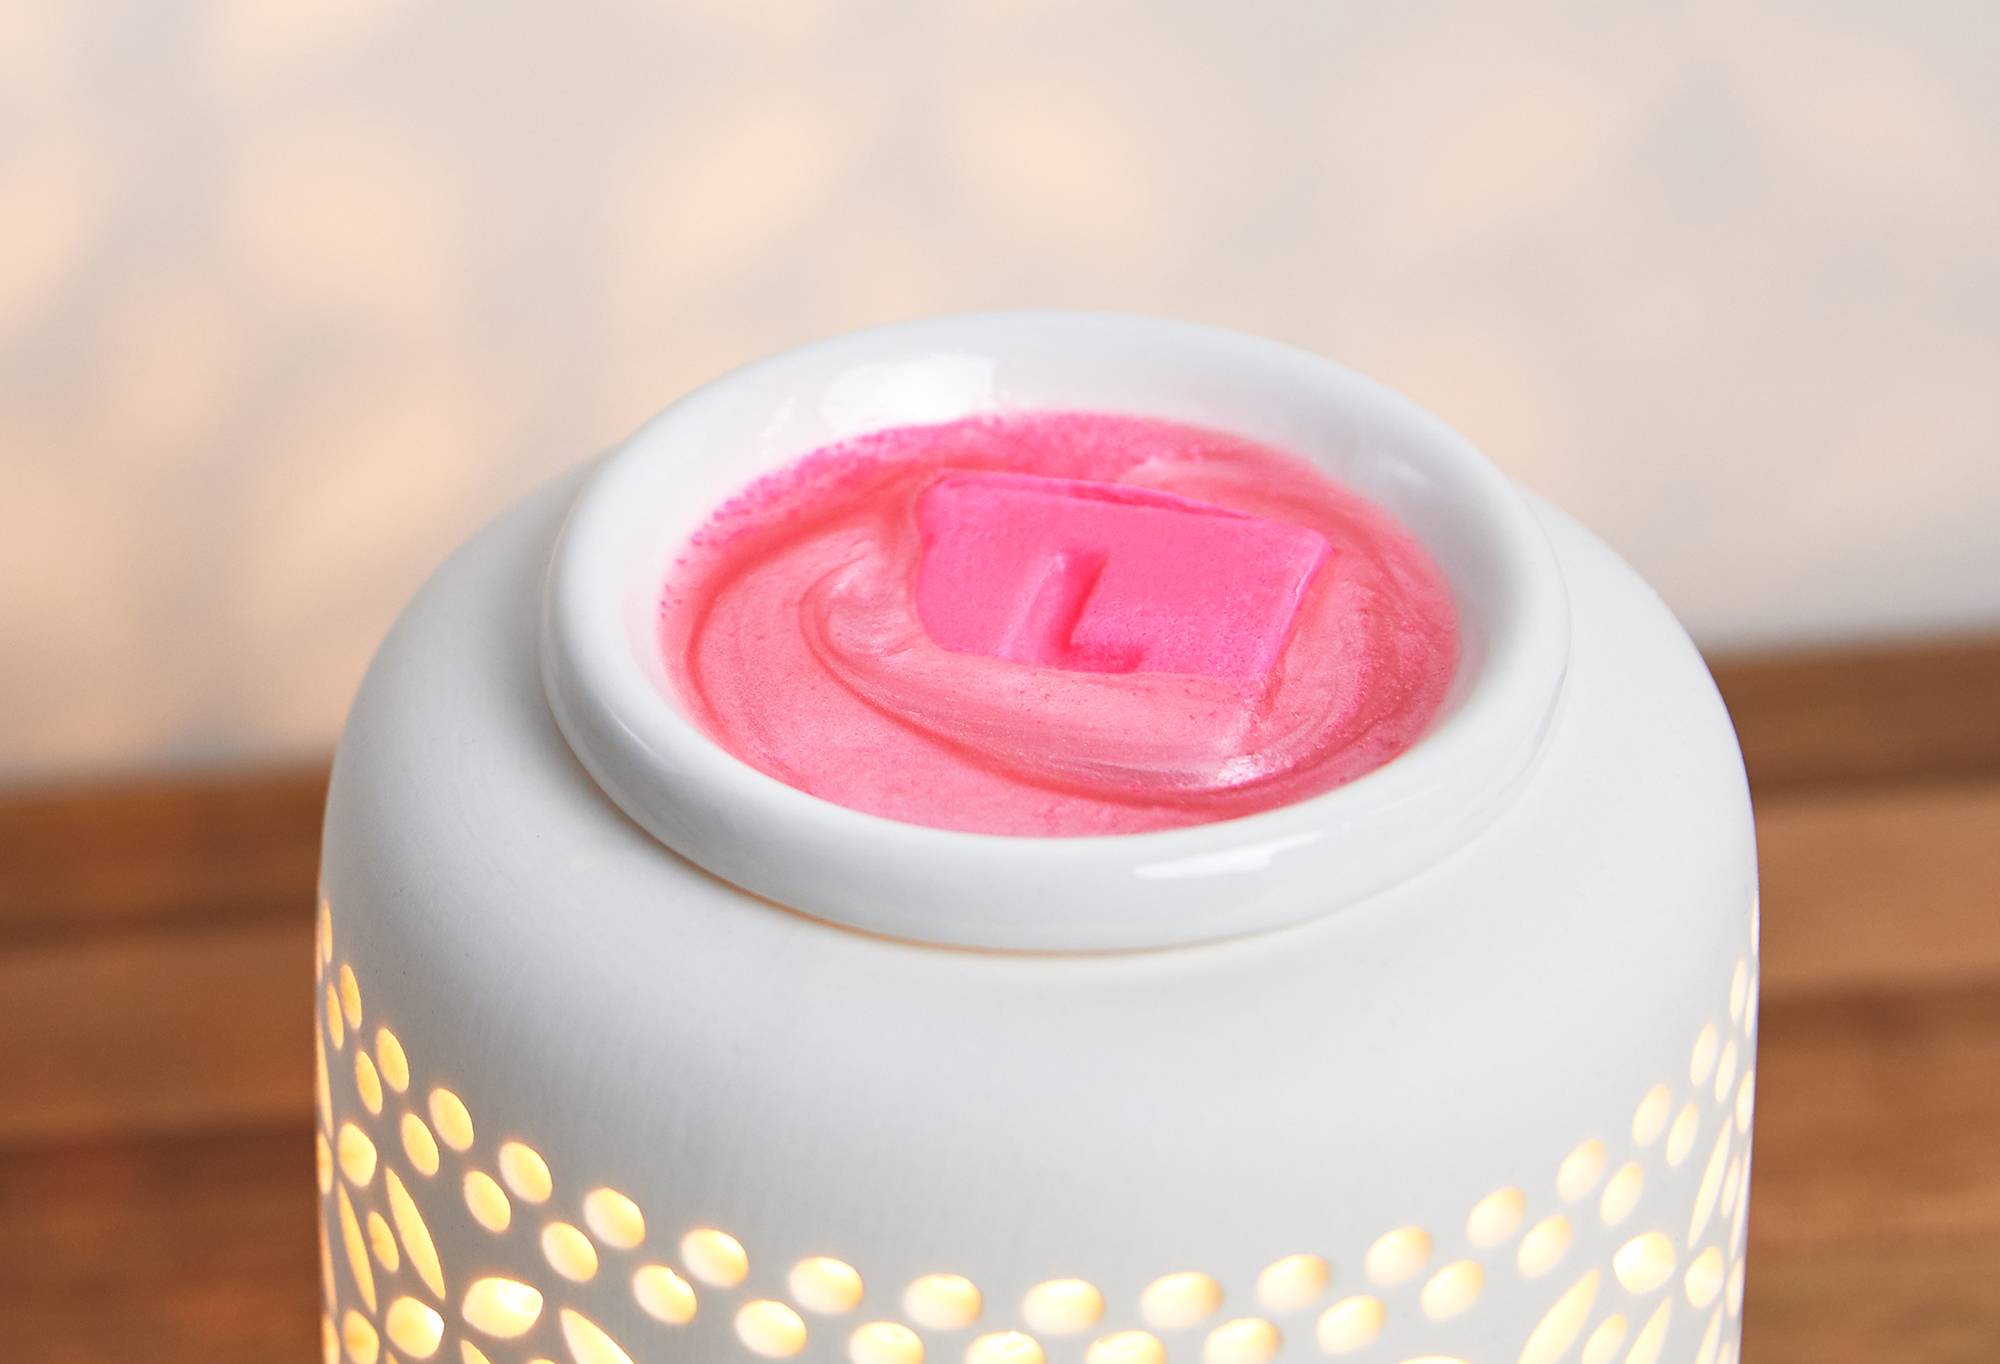 Image shows the Snow Fairy LUSH melt in a lit, white wax burner as it turns into a shimmering pink liquid.